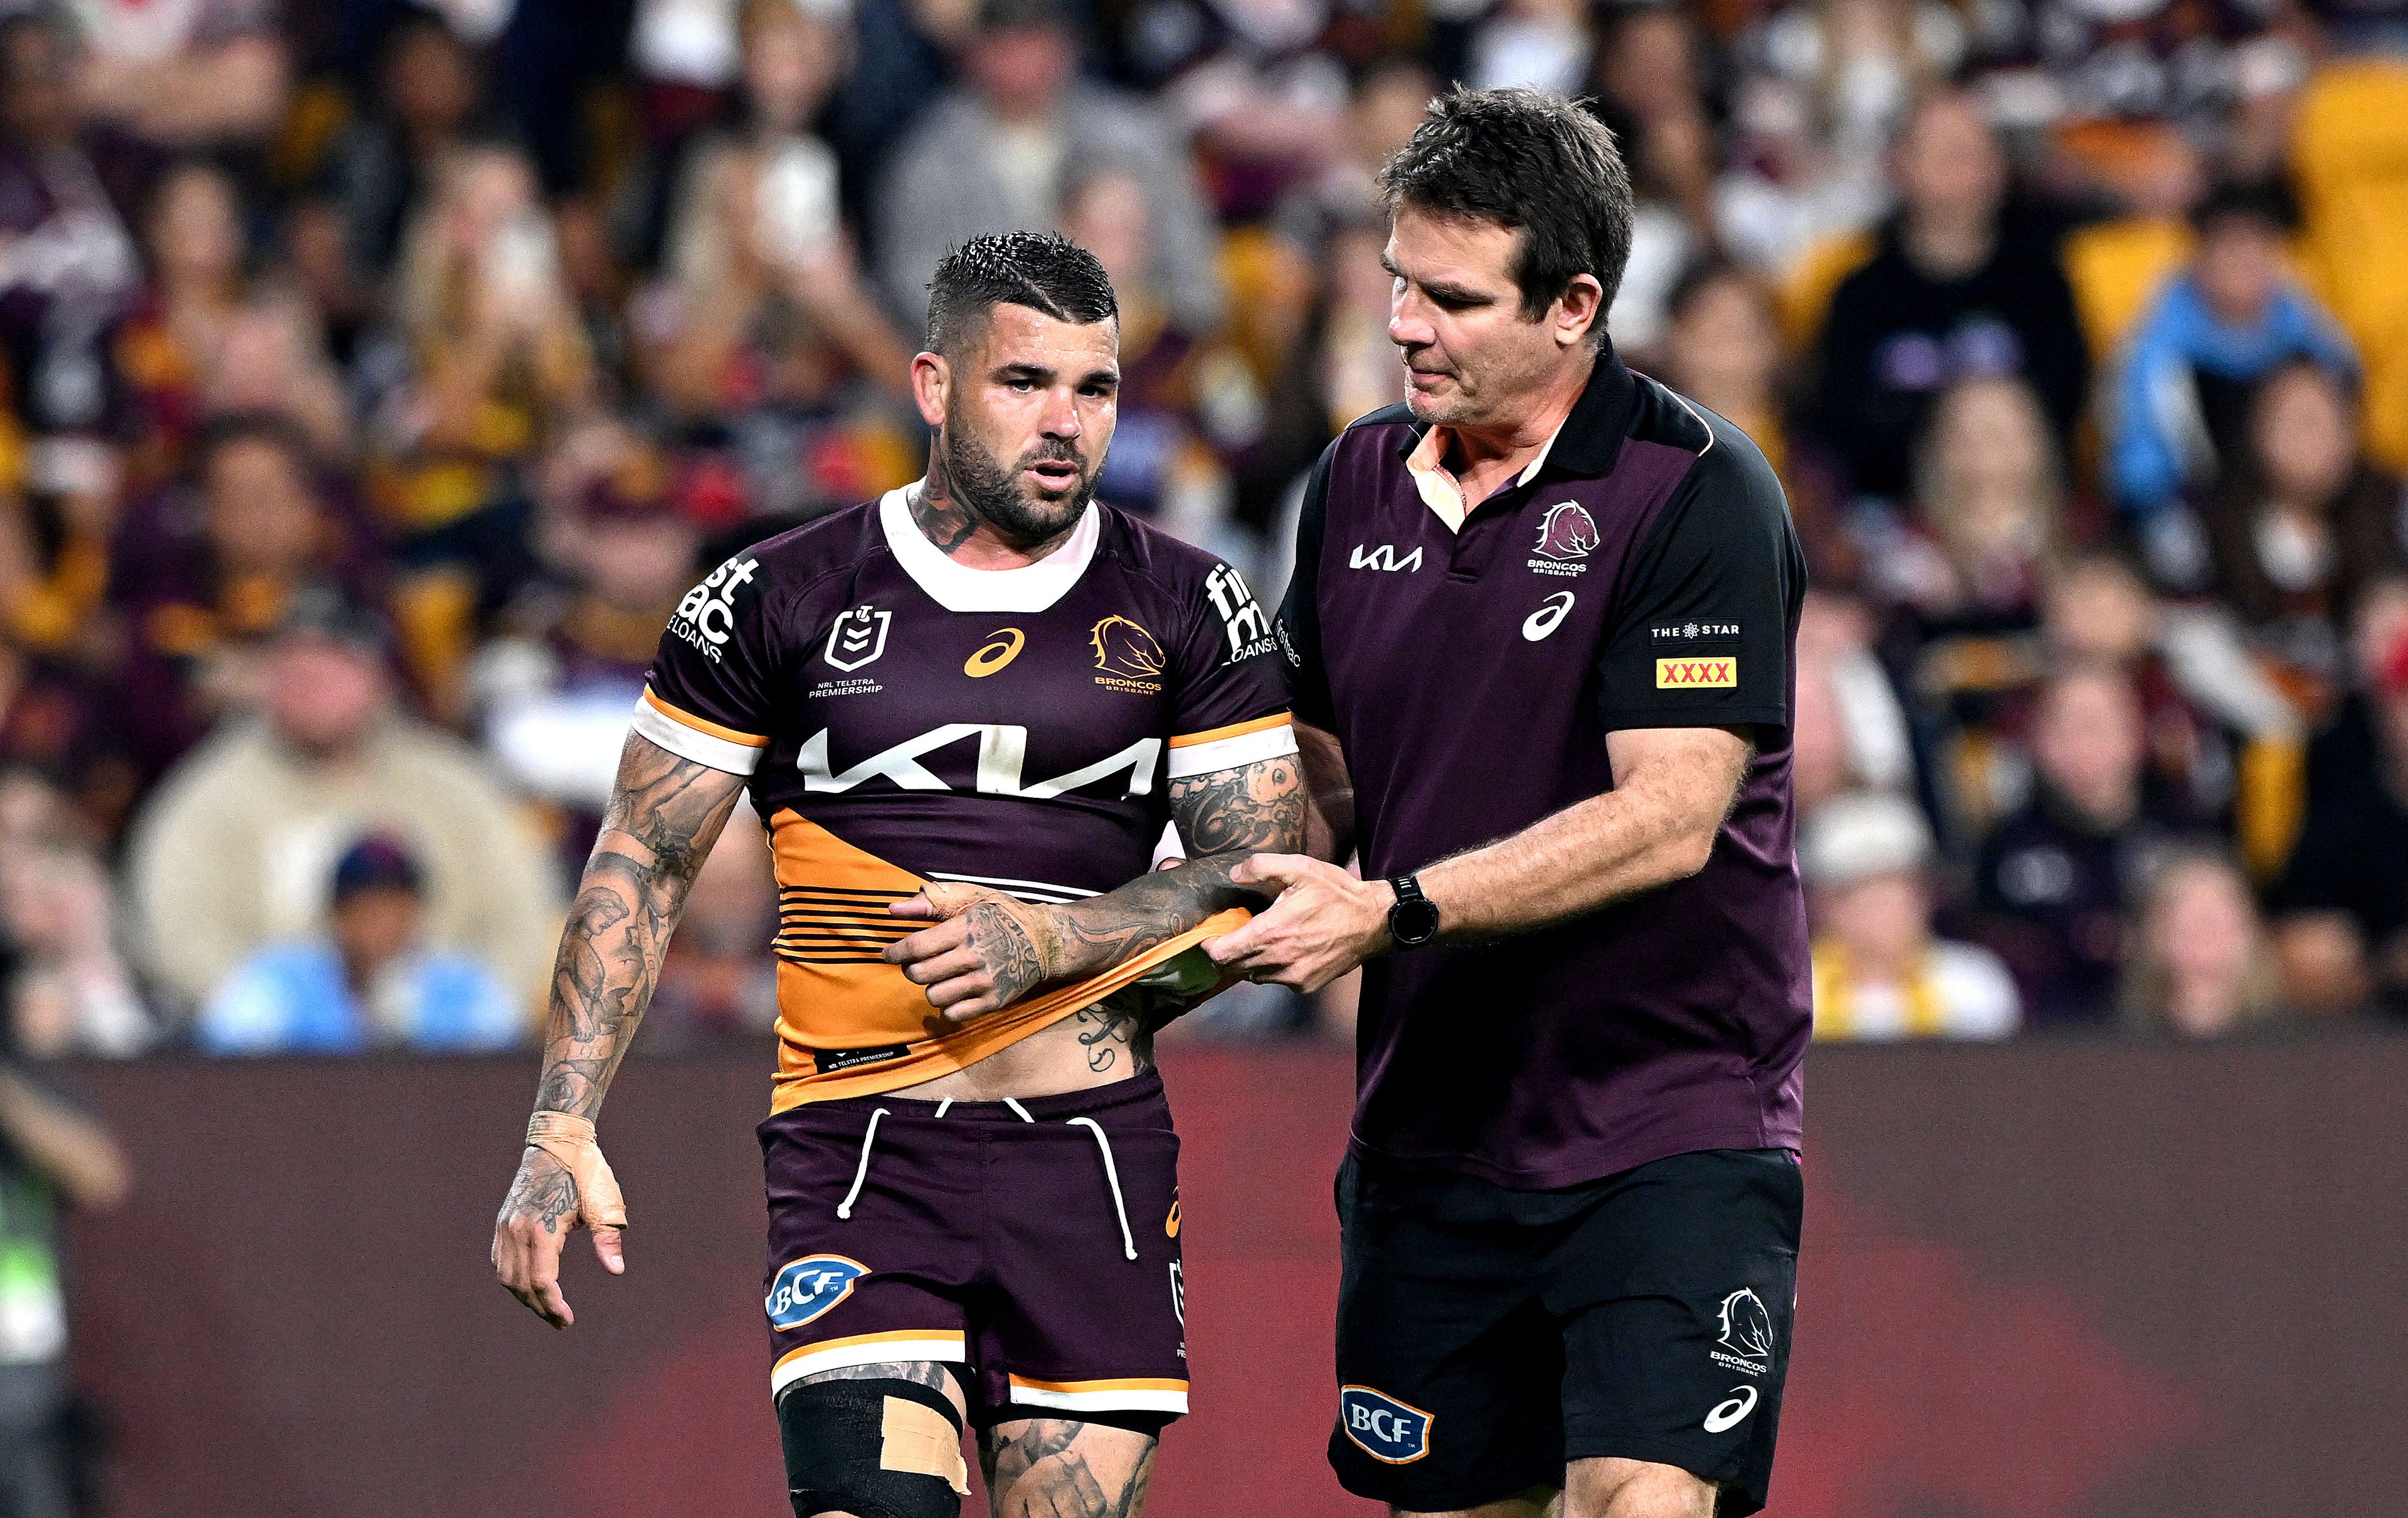 'Extremely difficult': Broncos legends divided over title hopes after Adam Reynolds injury